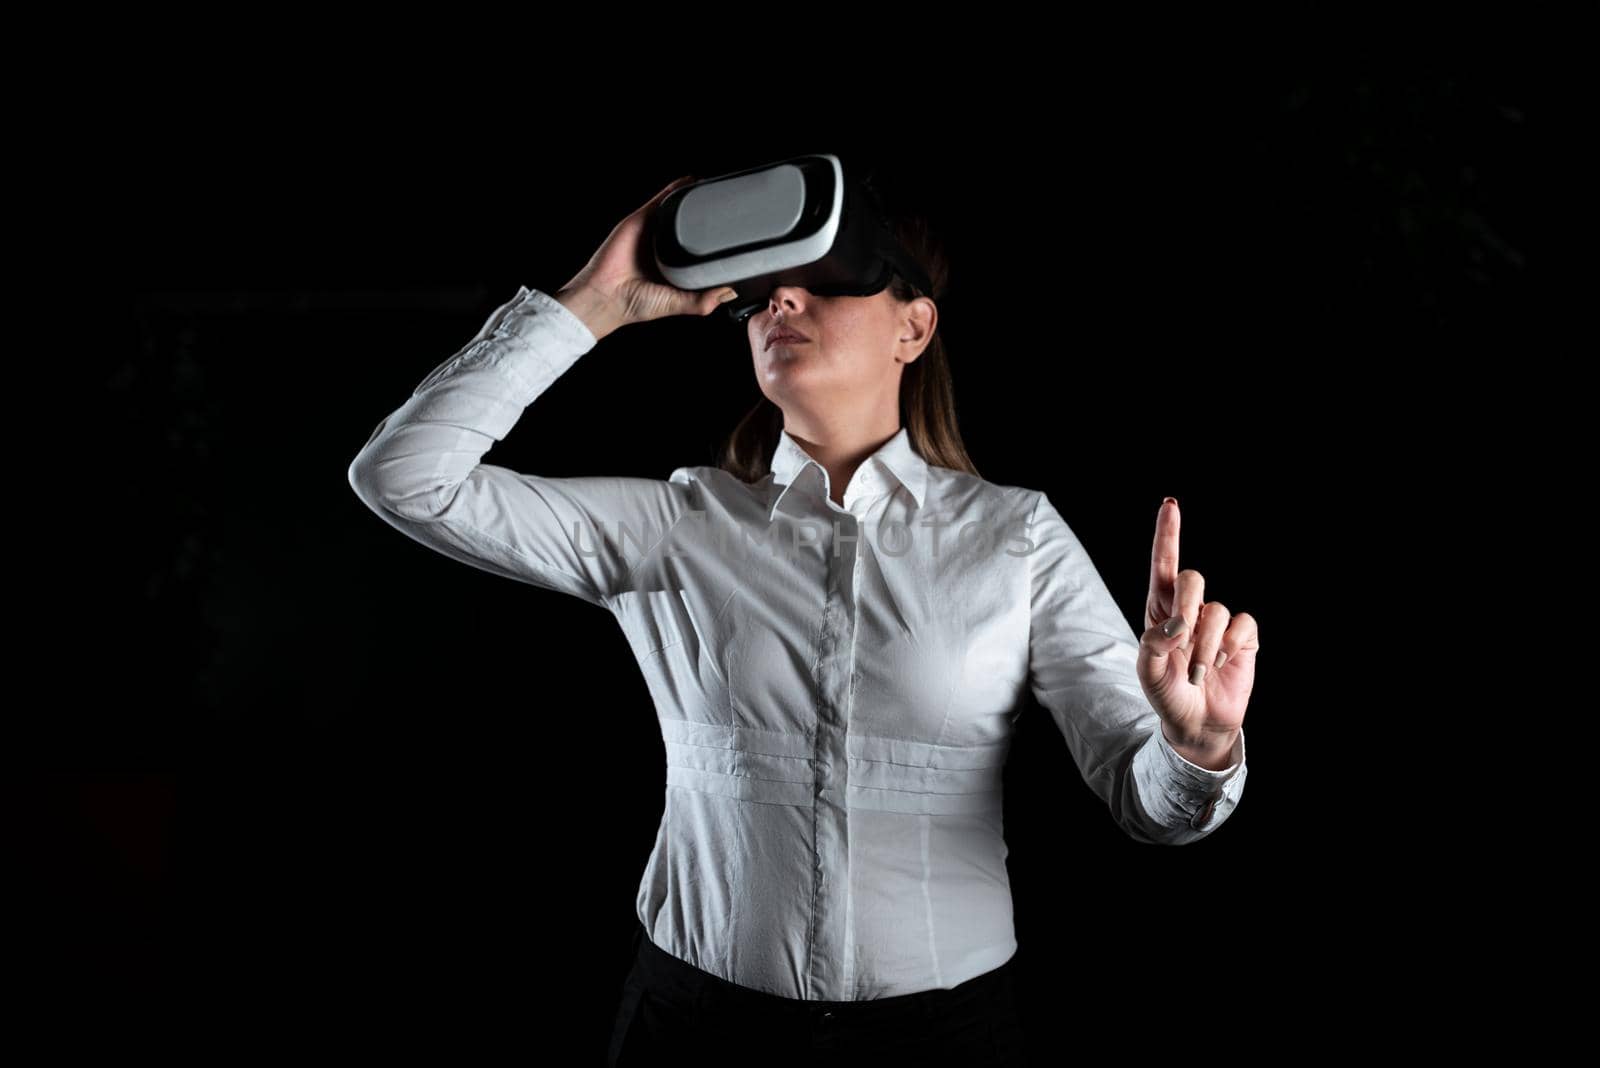 Businesswoman Standing And Gesturing While Learning Professional Skill Through Virtual Reality Simulator. Elegant Woman Presenting Modern Training Techniques. by nialowwa